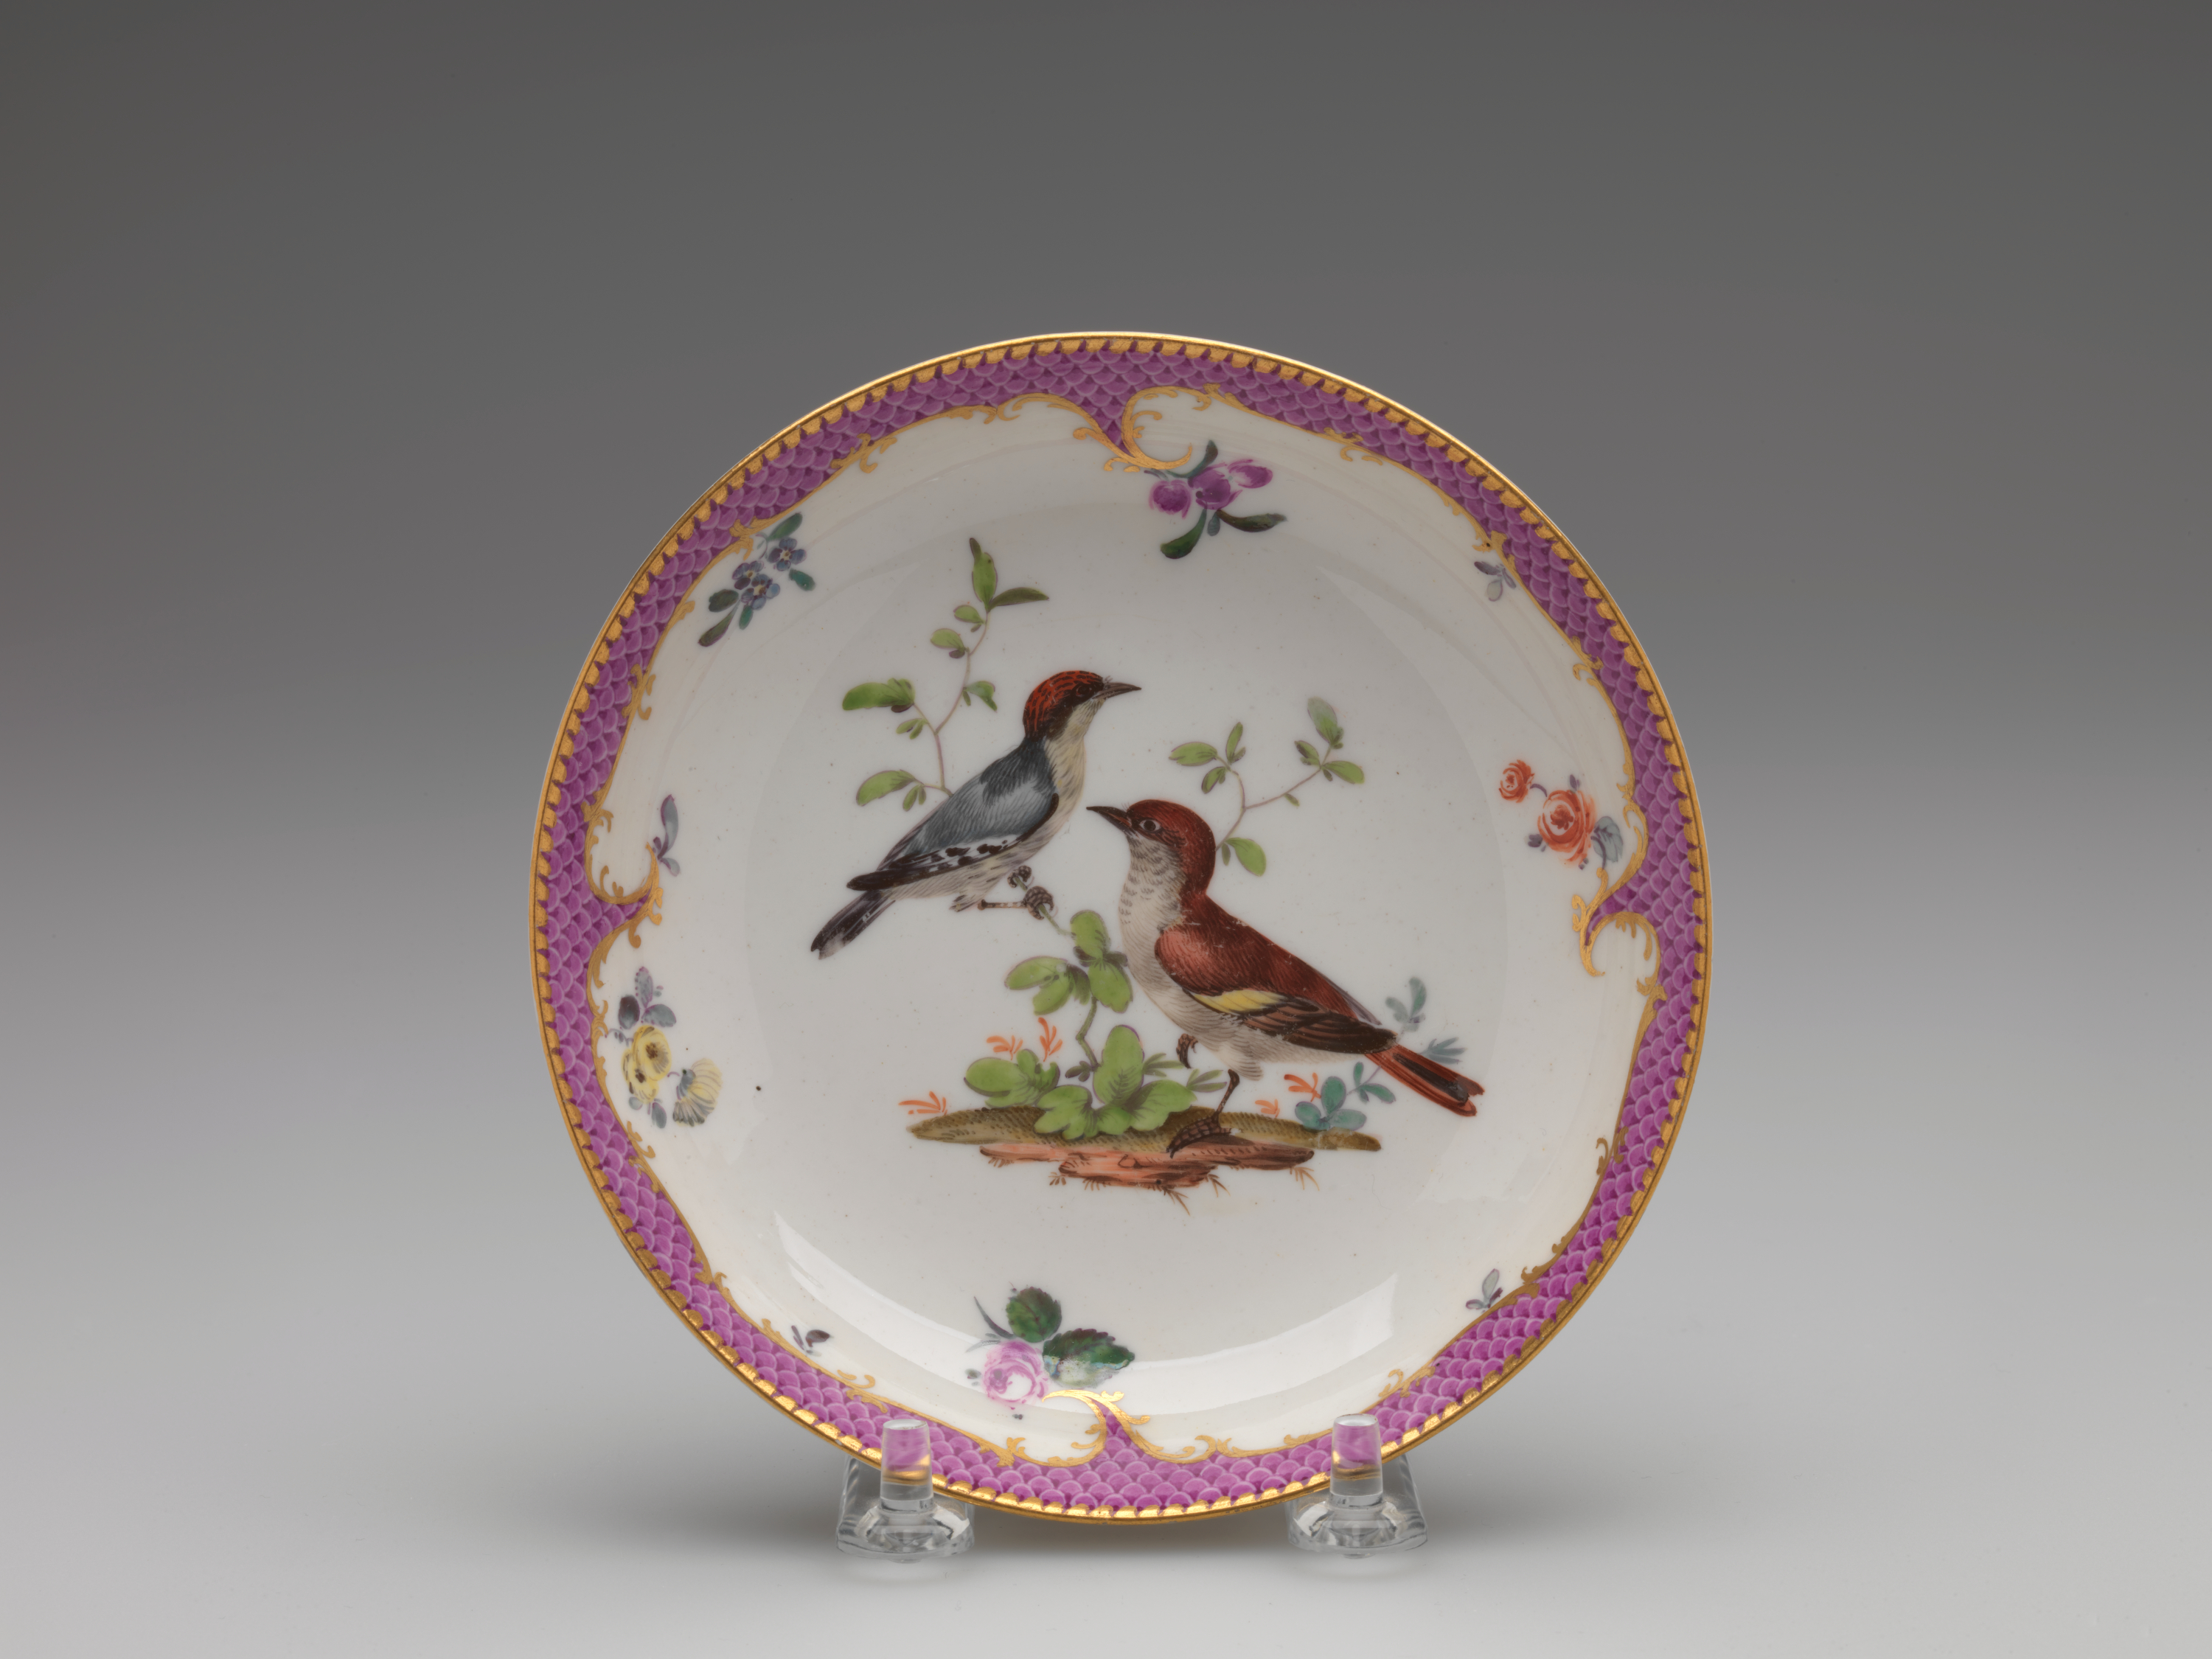 /A%20white%20saucer%20with%20gilded%2C%20pink%2C%20floral%20decorations%2C%20and%20two%20birds%3B%20one%20bird%20is%20blue%20with%20a%20red%20head%20positioned%20on%20a%20branch%2C%20the%20other%20is%20standing%20on%20the%20ground.